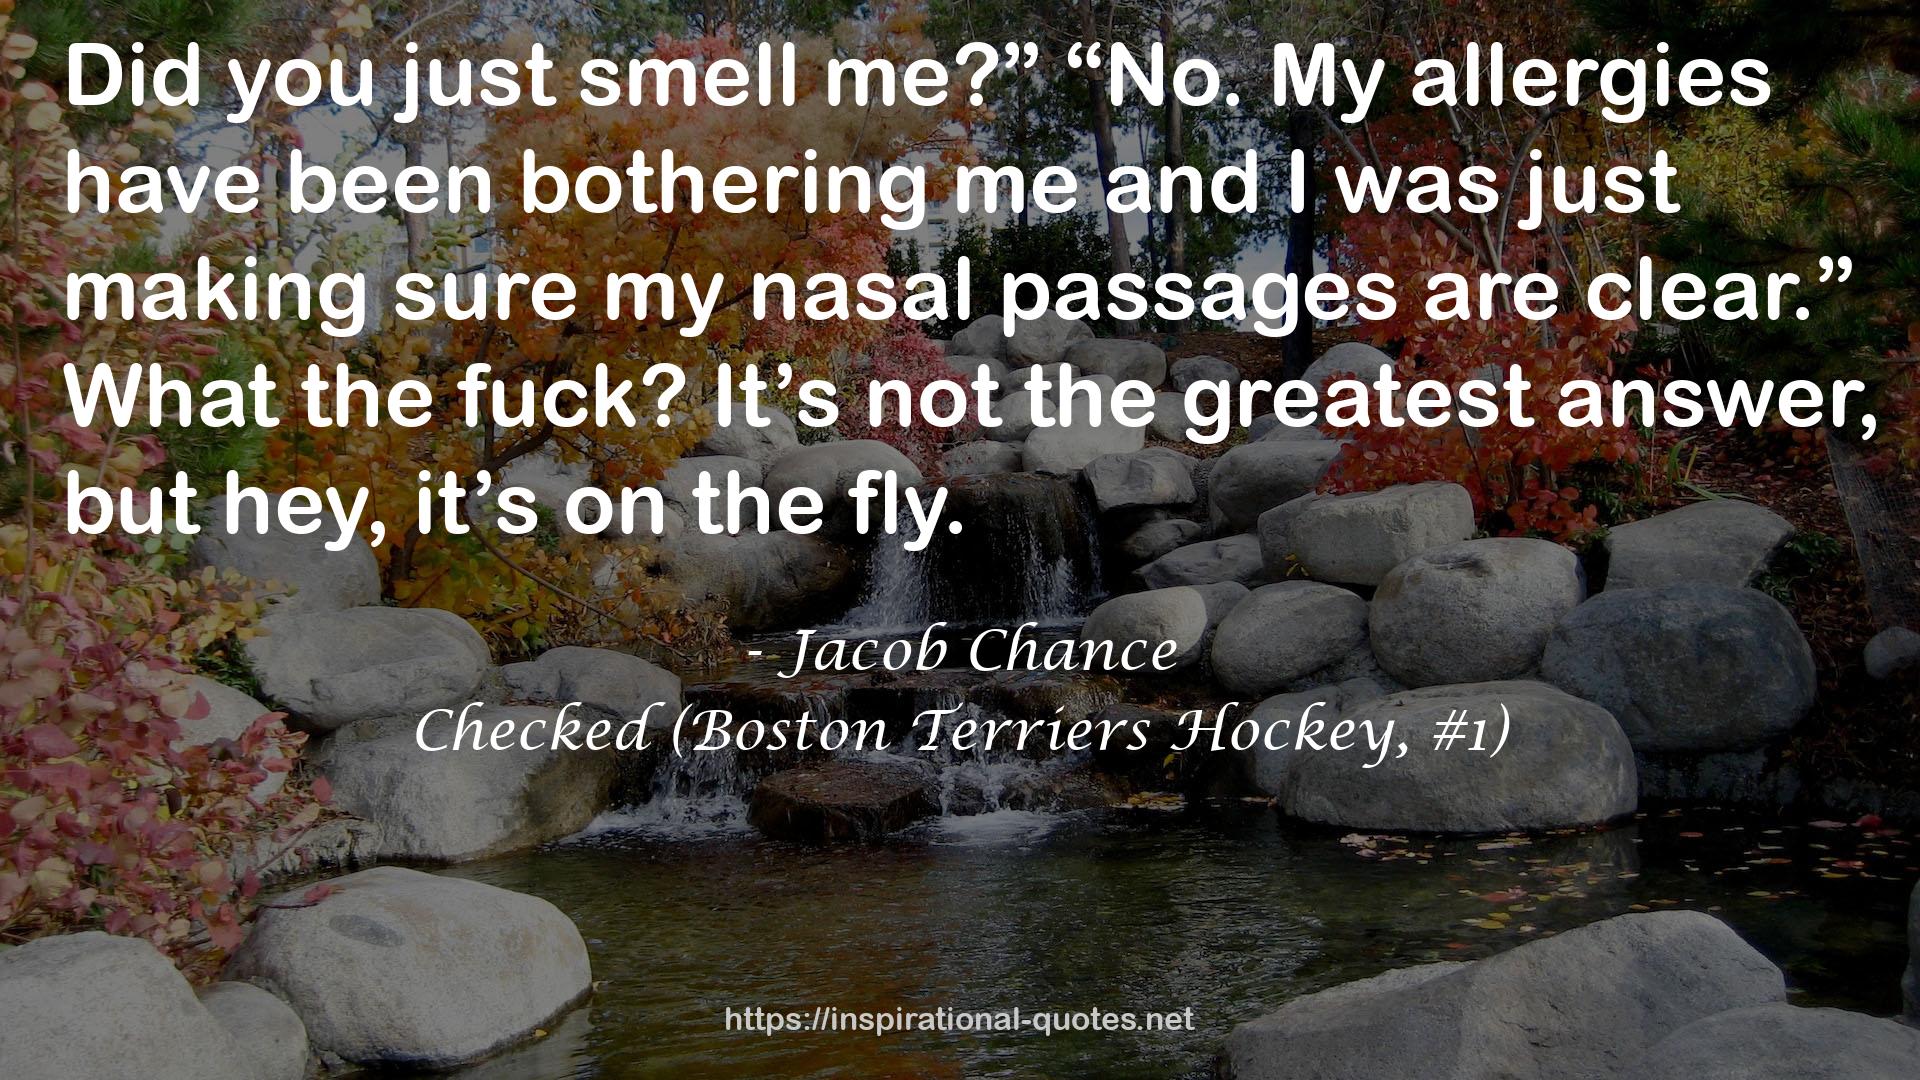 Checked (Boston Terriers Hockey, #1) QUOTES